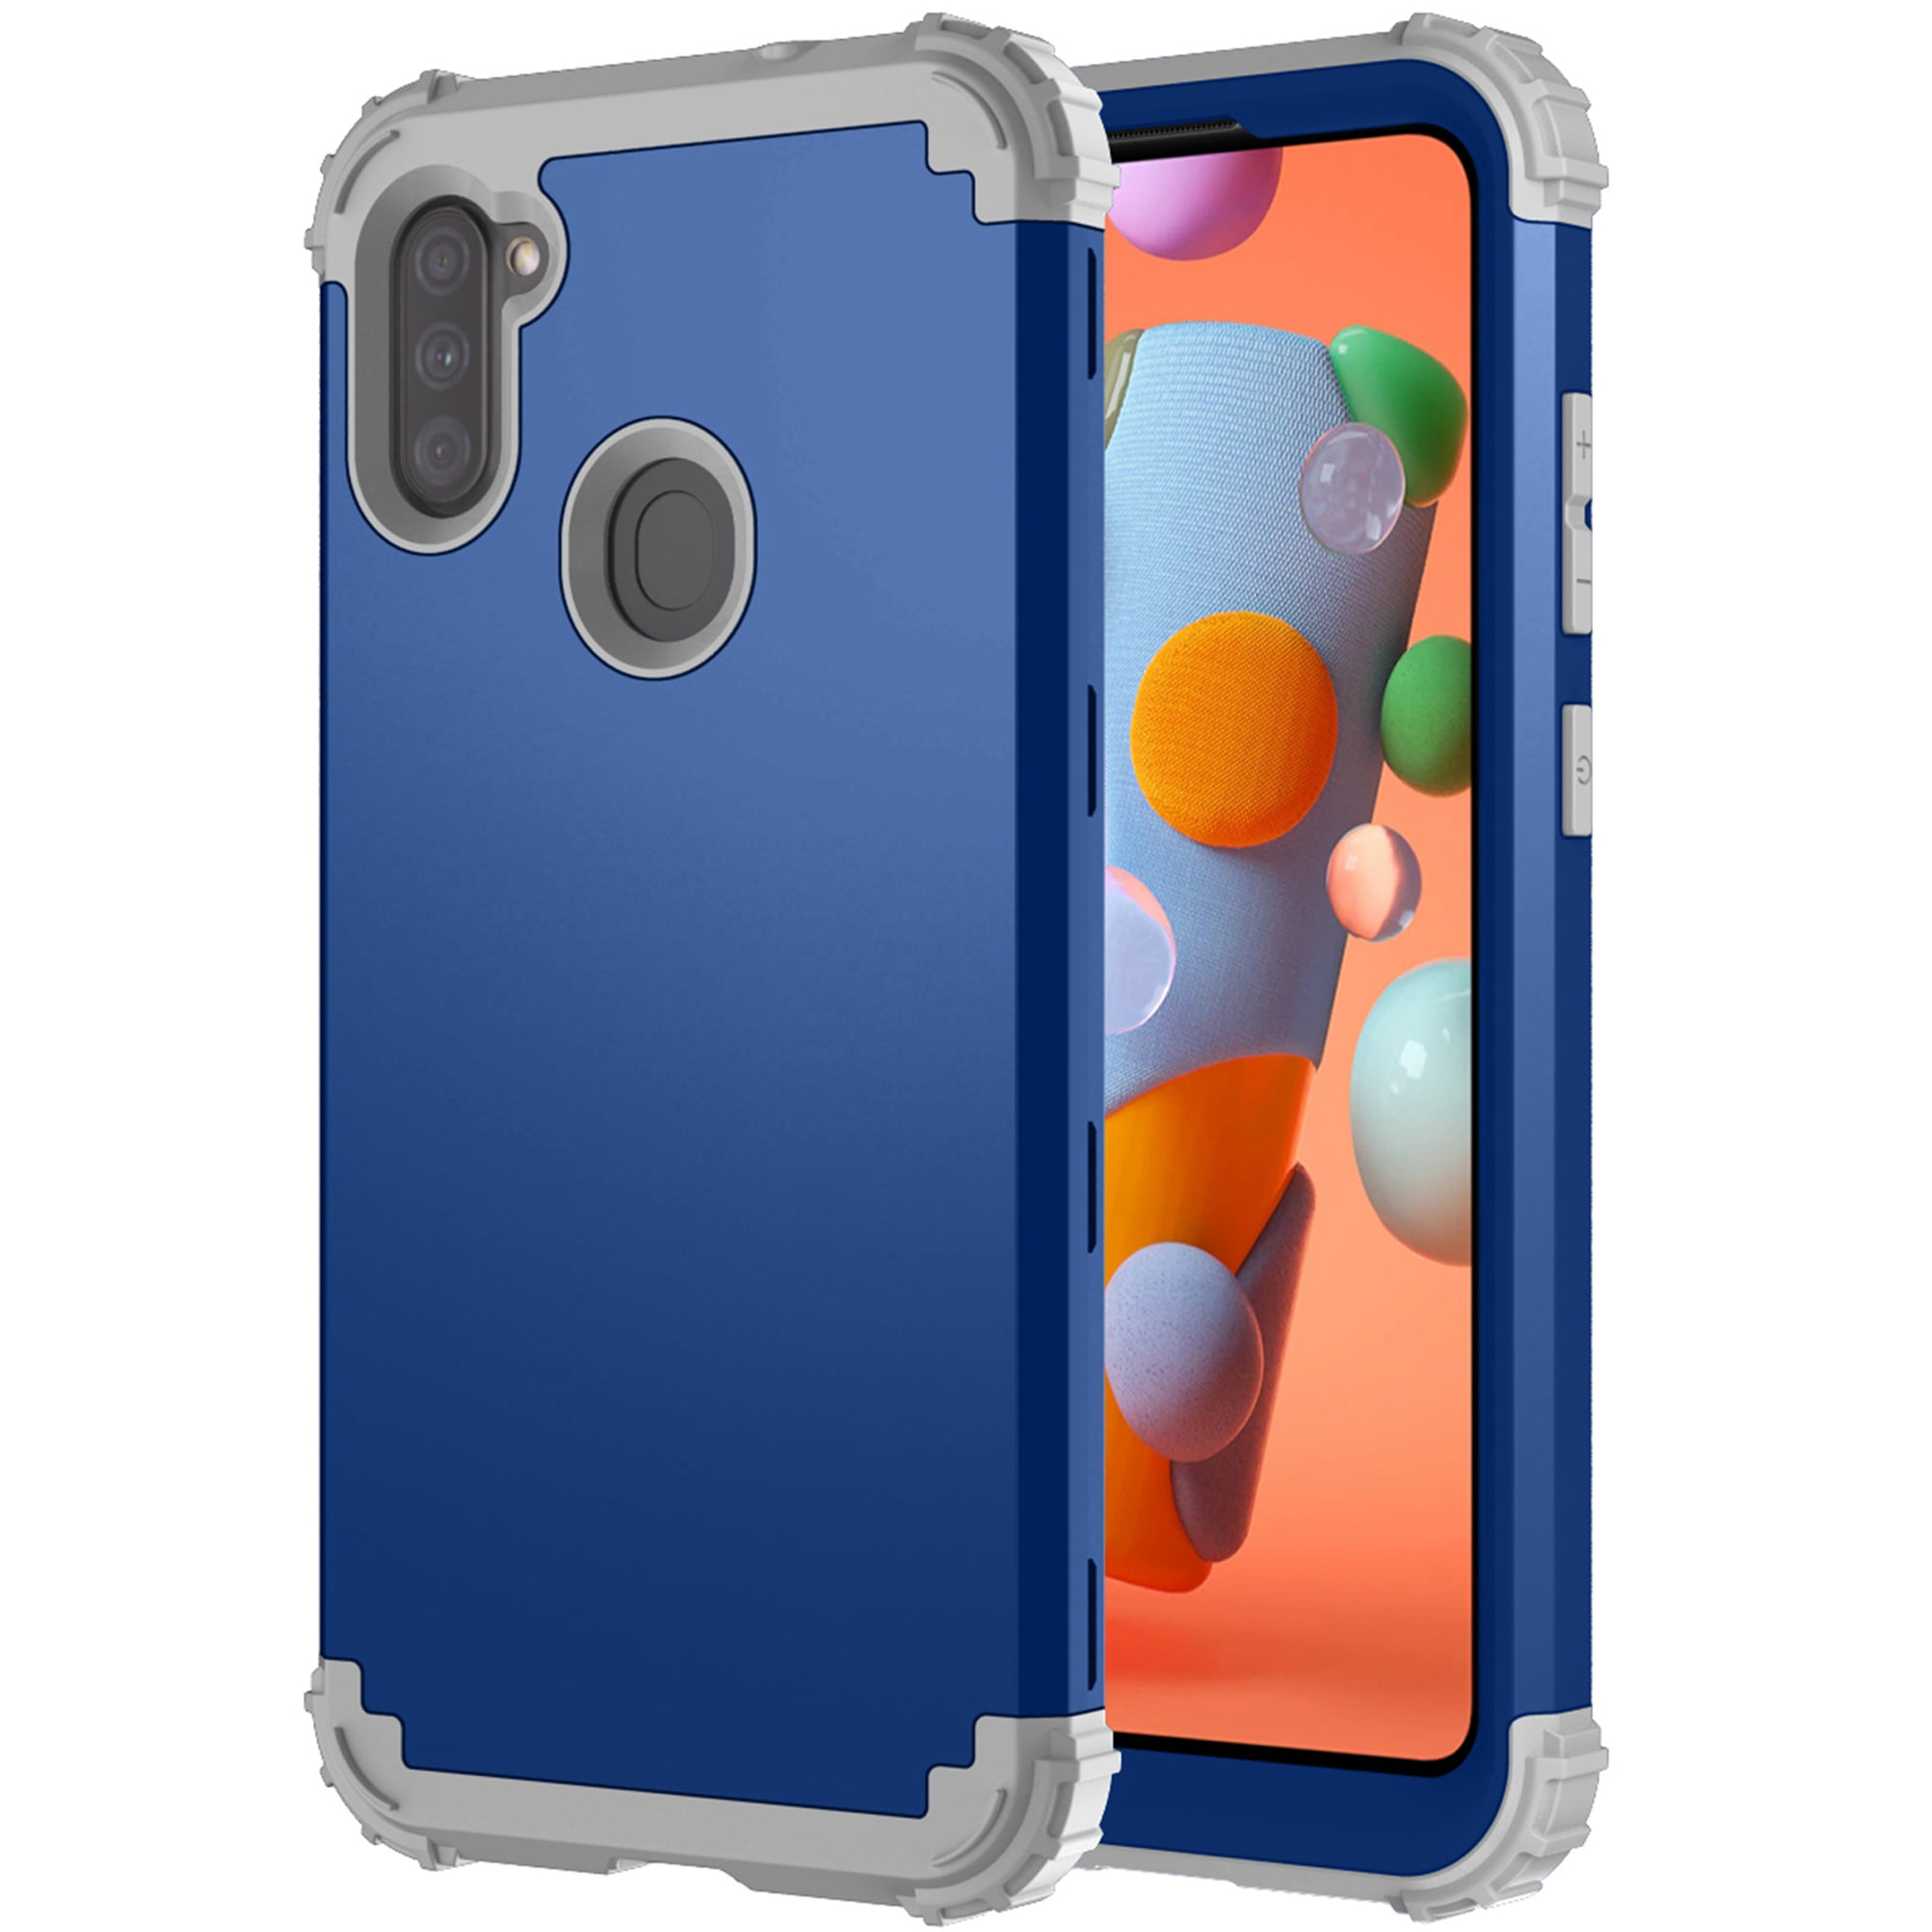 Phone Cases For Samsung A11 At Walmart